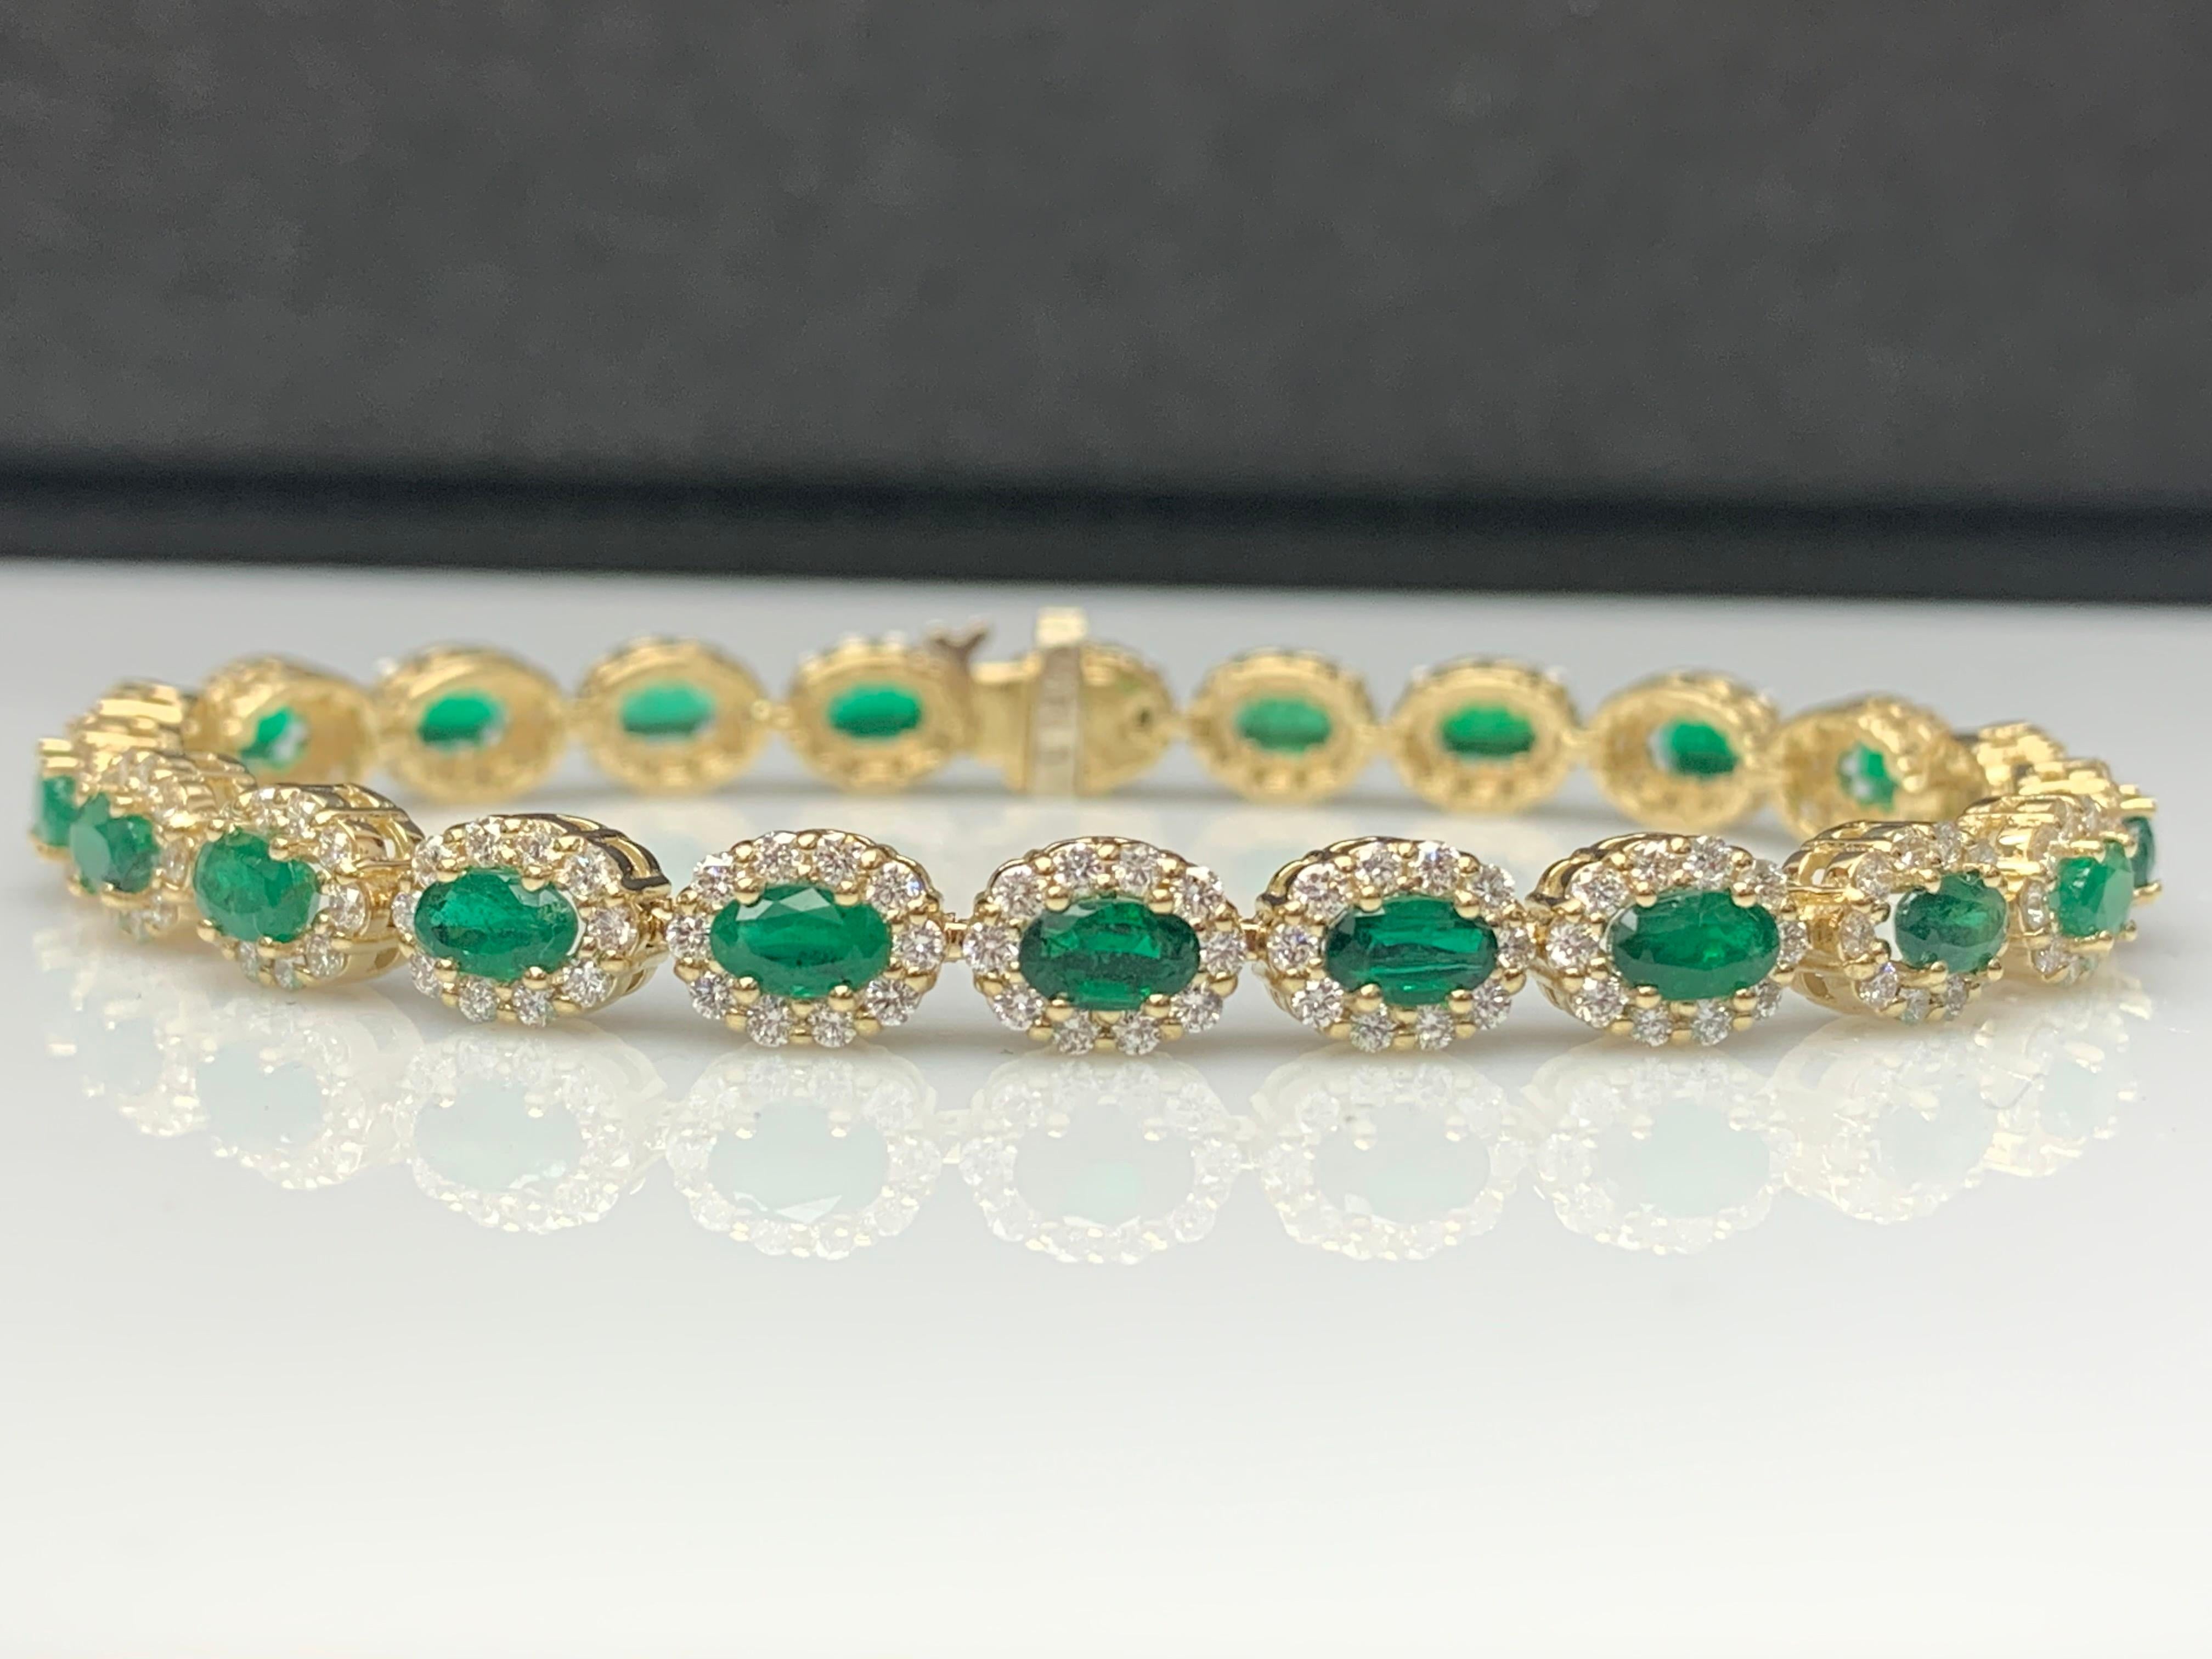 Women's 4.69 Carat Oval Cut Emerald and Diamond Halo Bracelet in 14K Yellow Gold For Sale